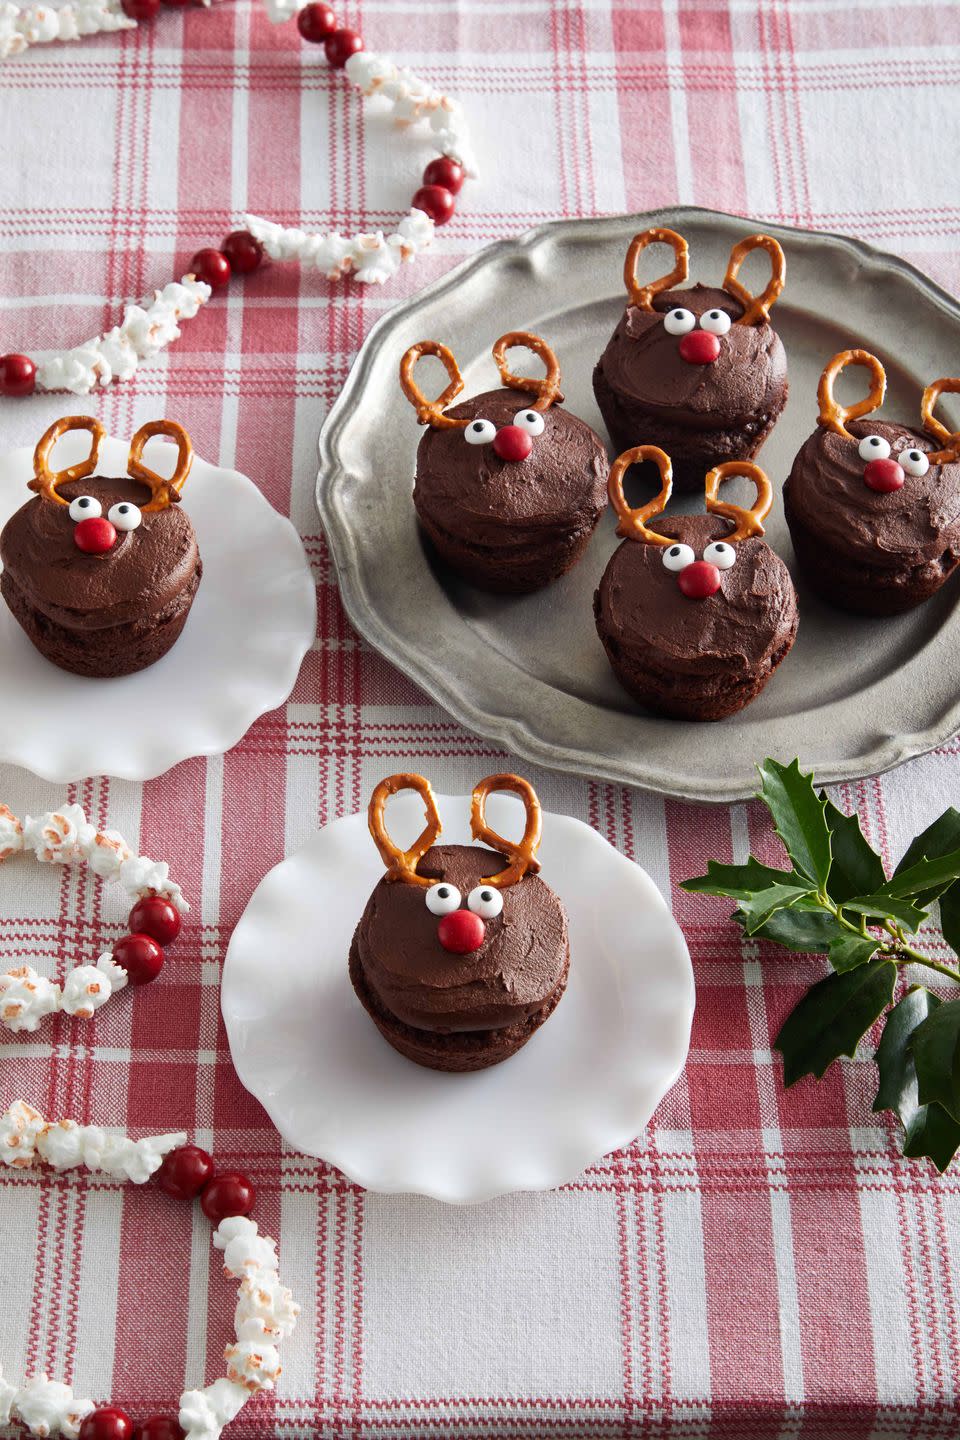 brownies cut into rounds topped with icing and decorated to look like a reindeer with pretzel antlers